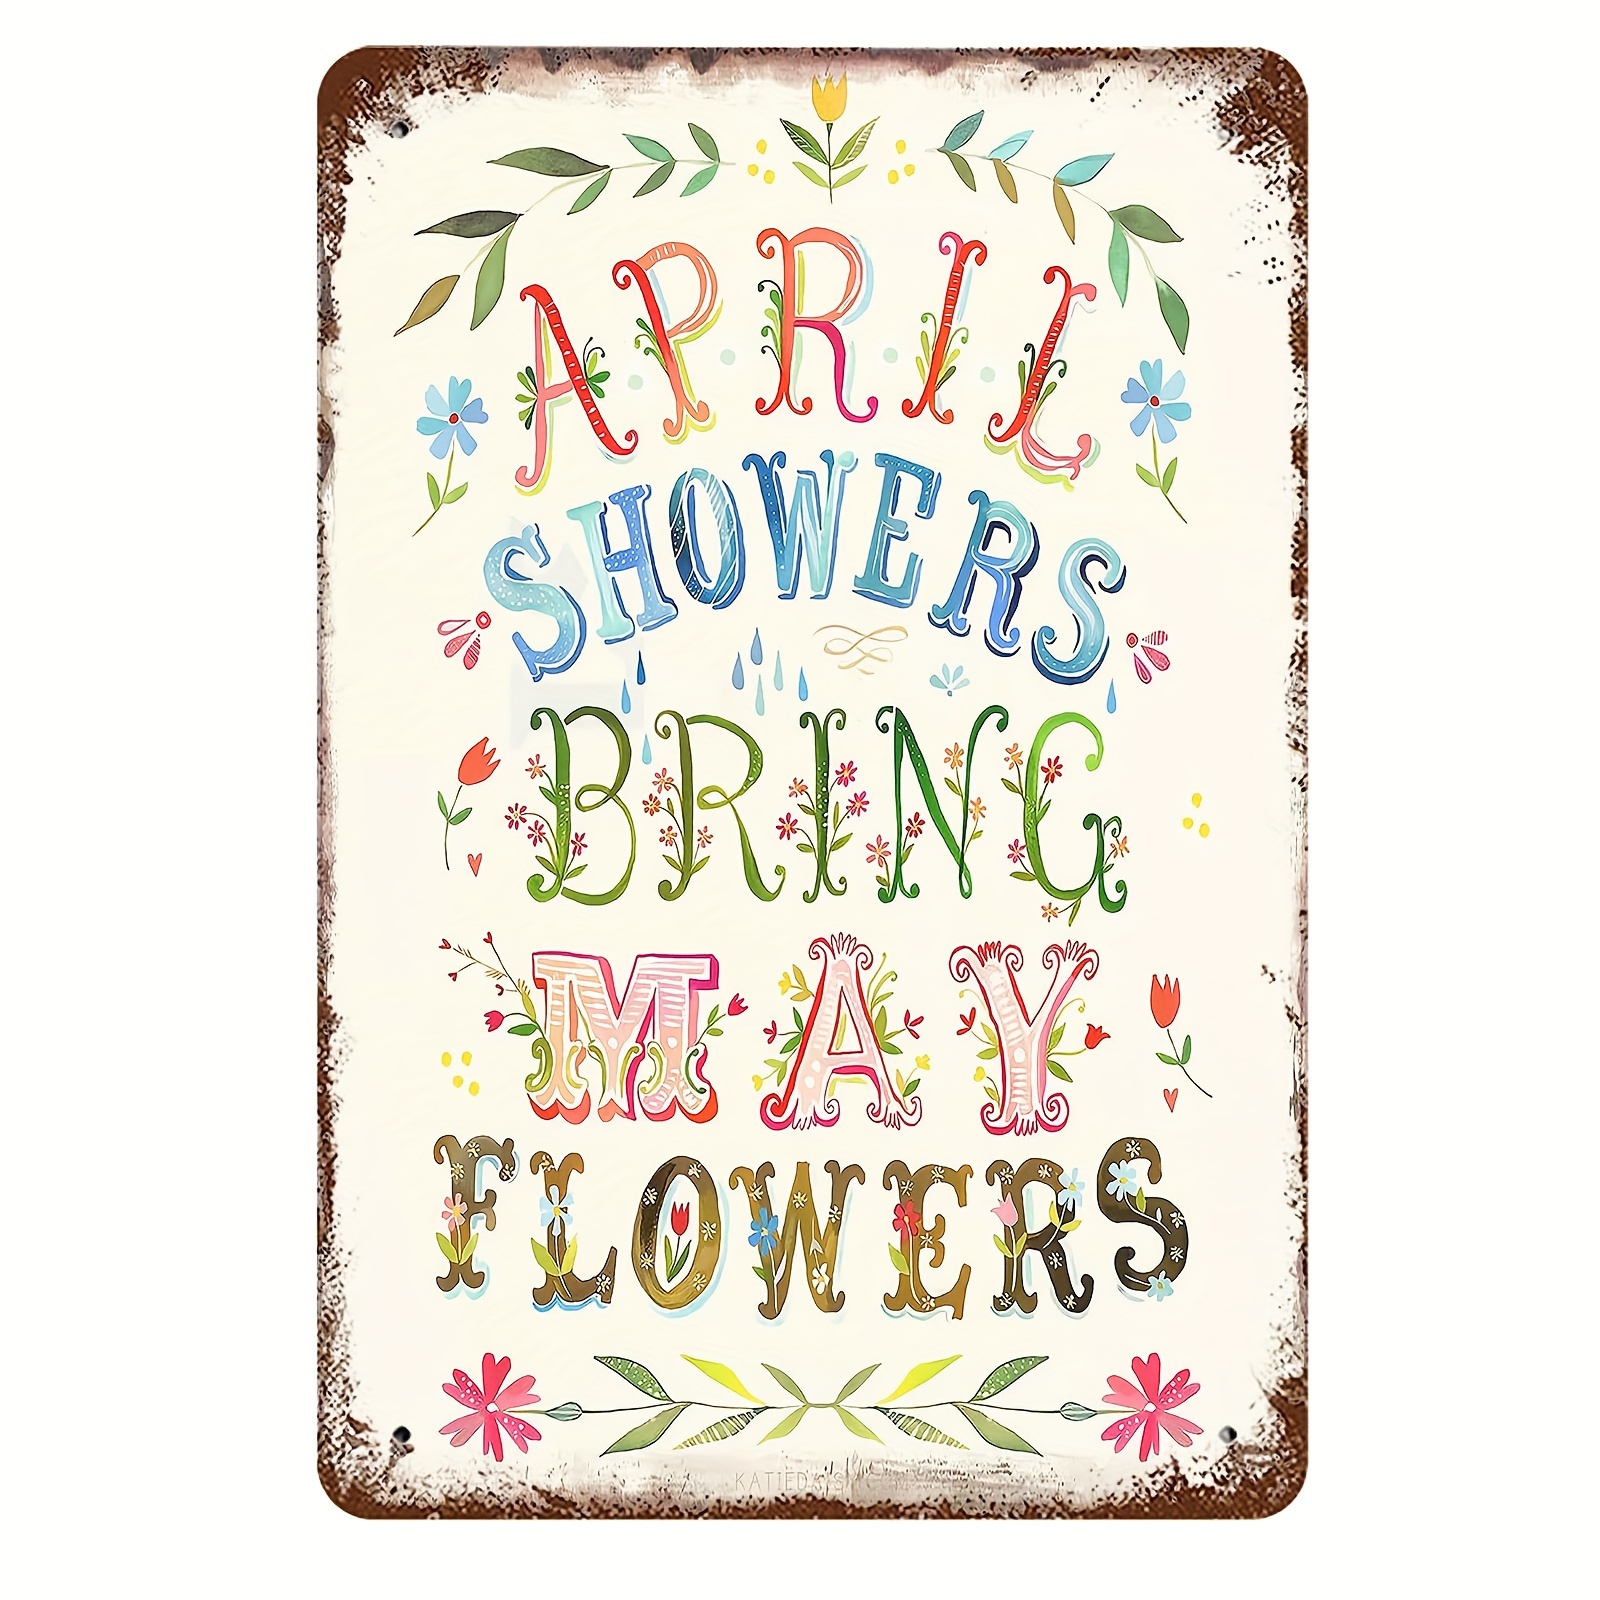 

Vintage Sign, Flowers Quotes, Wall Decor April Showers Bring May Flowers Crafts Poster Art For Home Living Room Bedroom Garden Garage Office Cafe Bar Pub 8x12 Inch